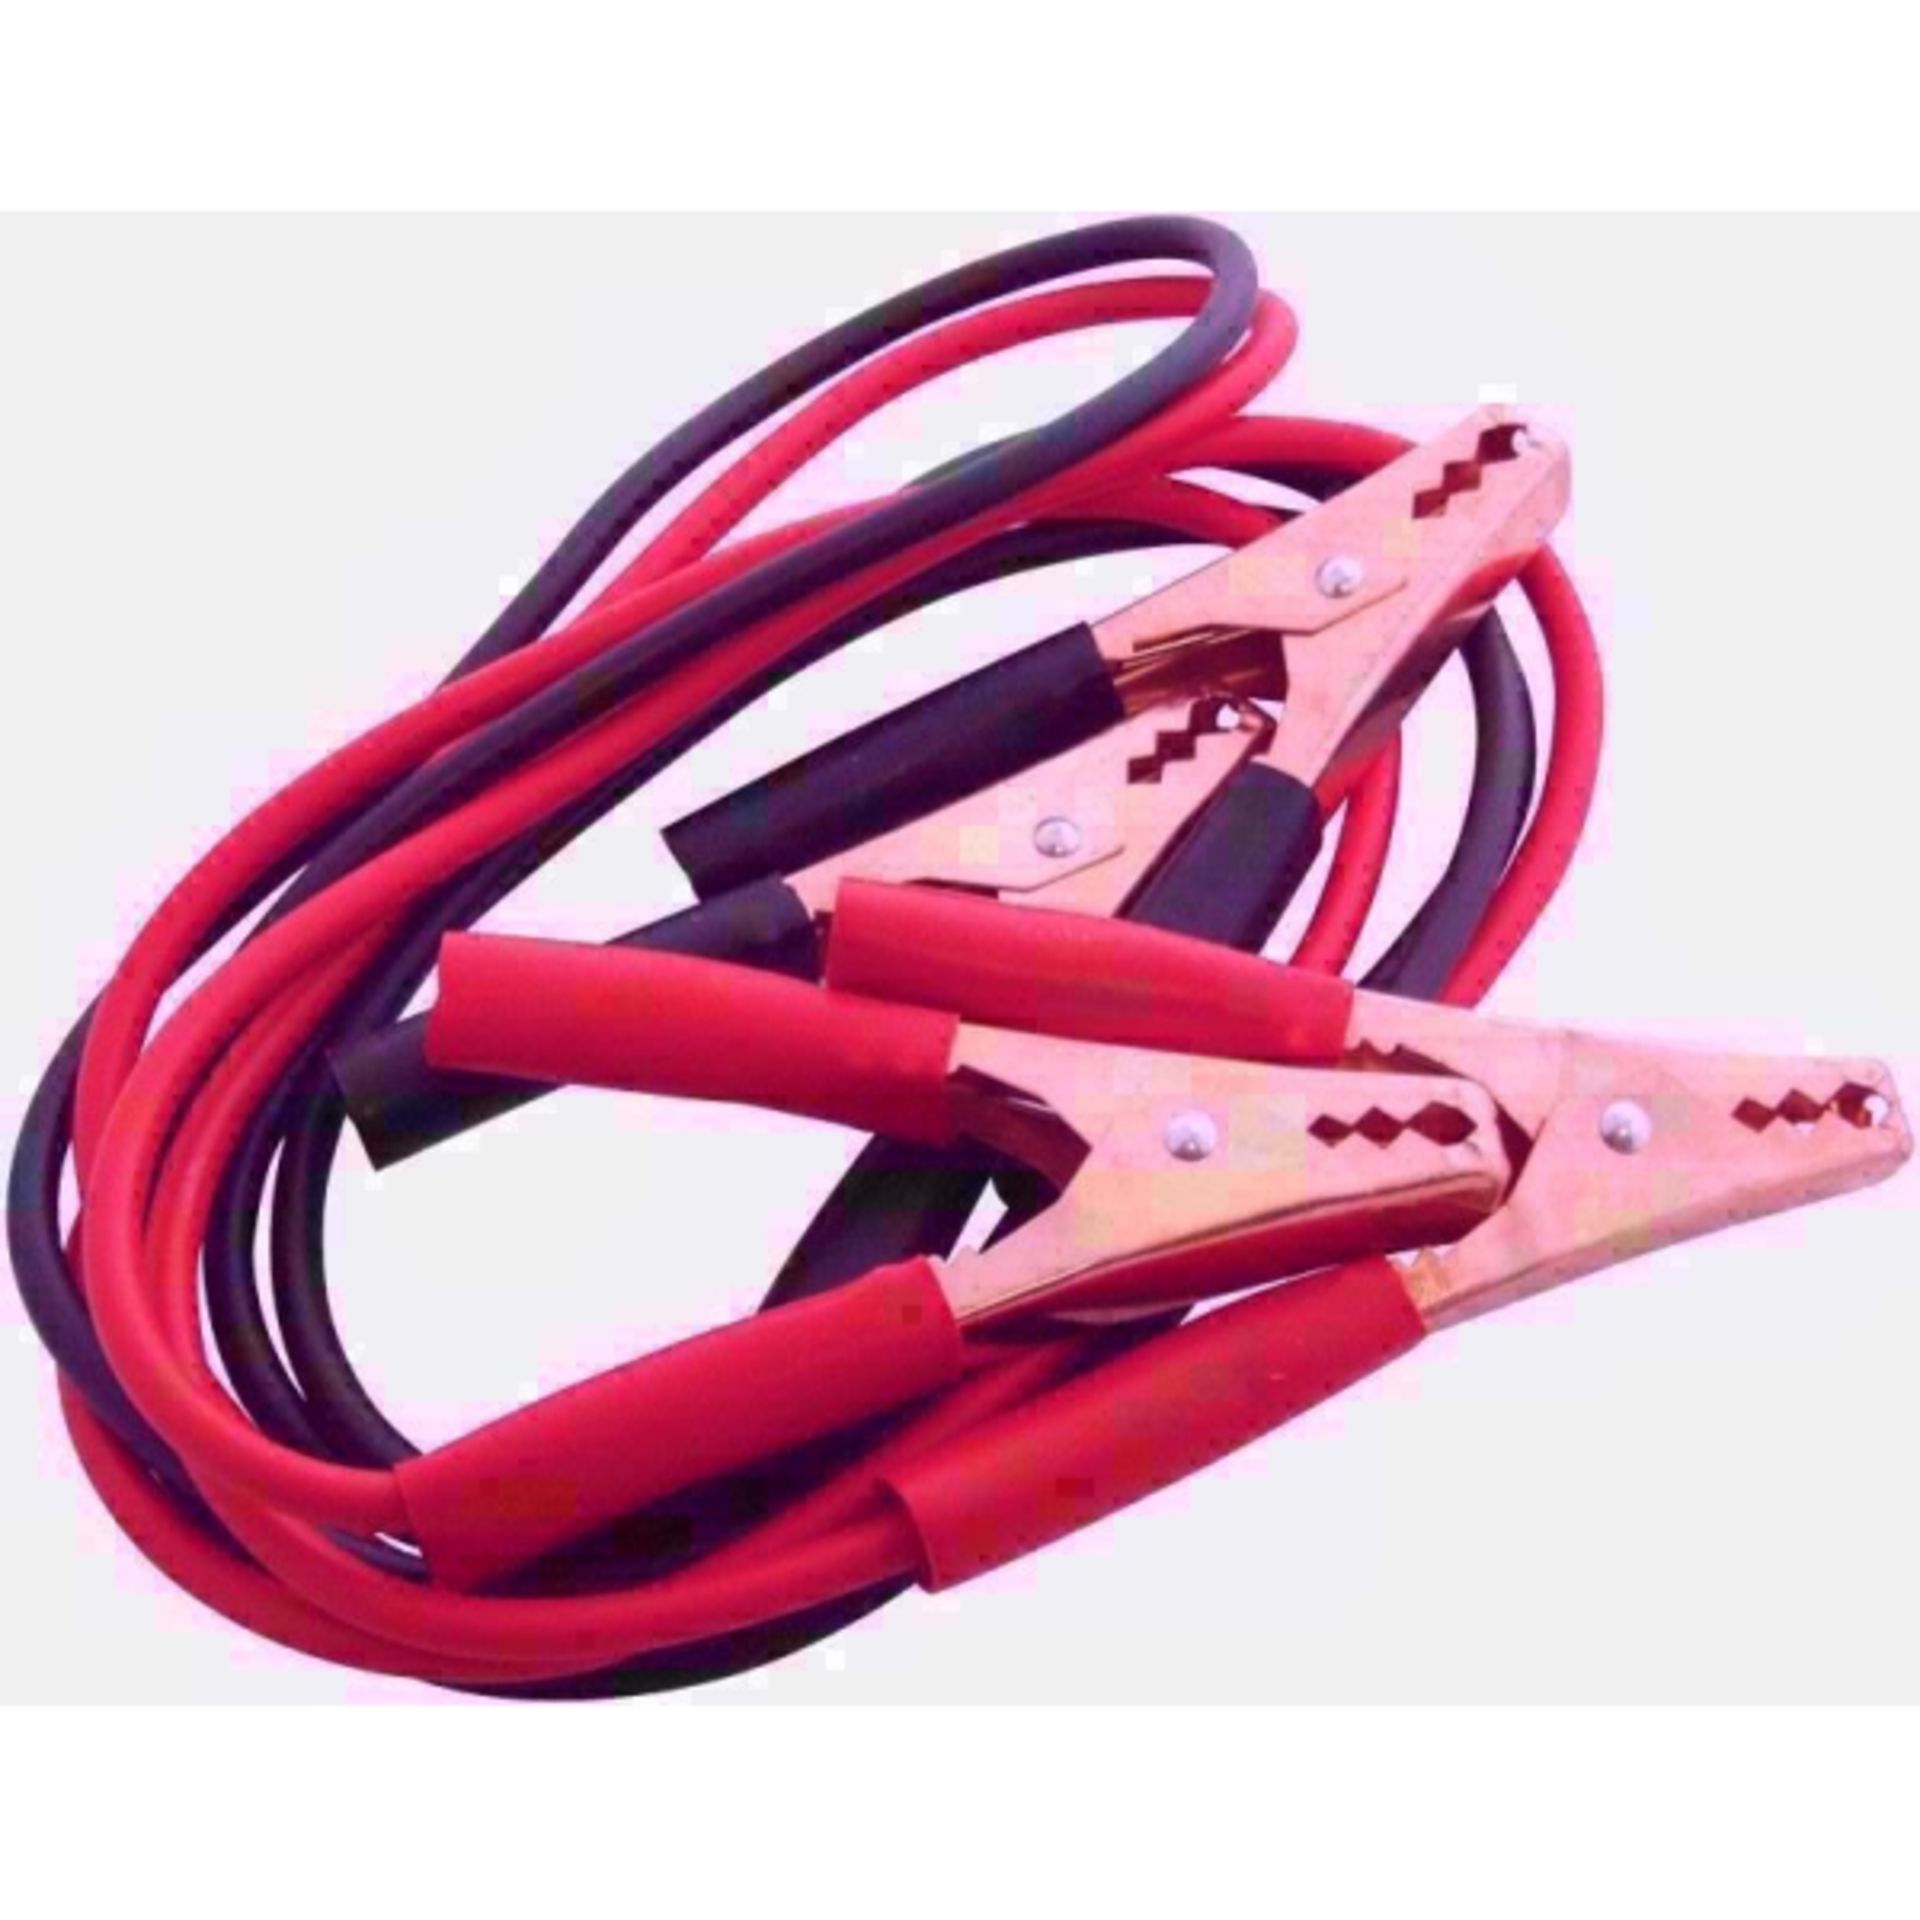 V Brand New 800amp Booster Cable Jump Leads X 2 YOUR BID PRICE TO BE MULTIPLIED BY TWO